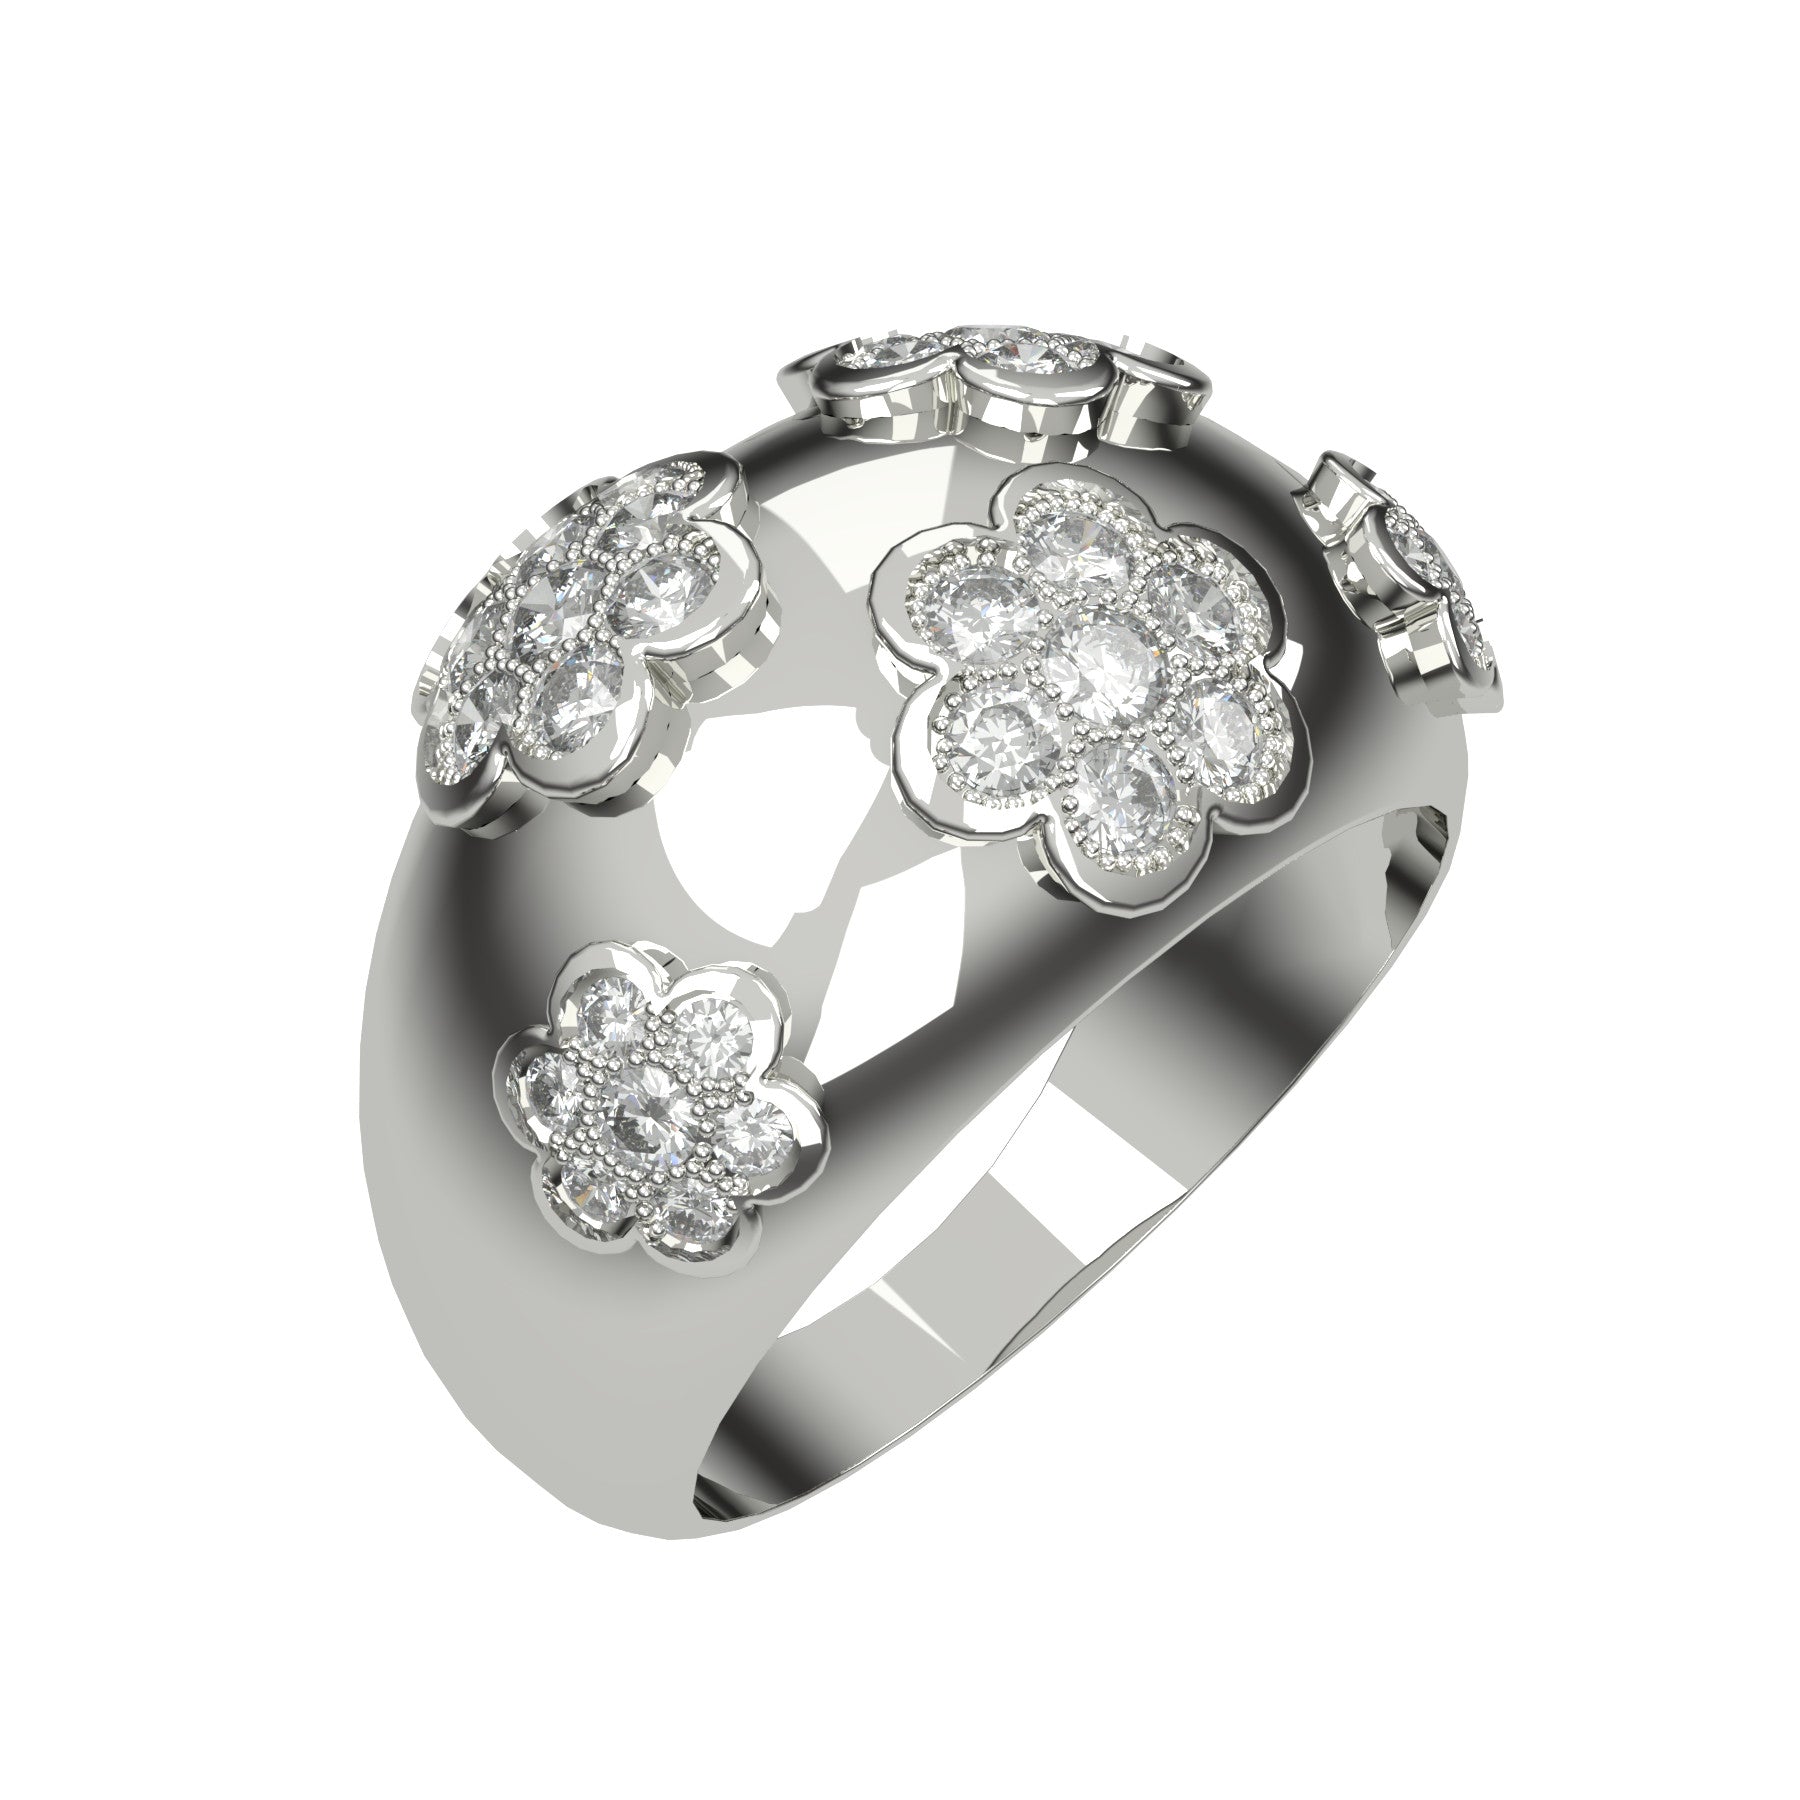 Blooming band ring, natural round diamonds, 18 k white gold, weight about 7,50 g (0.26 oz), width 12 mm max